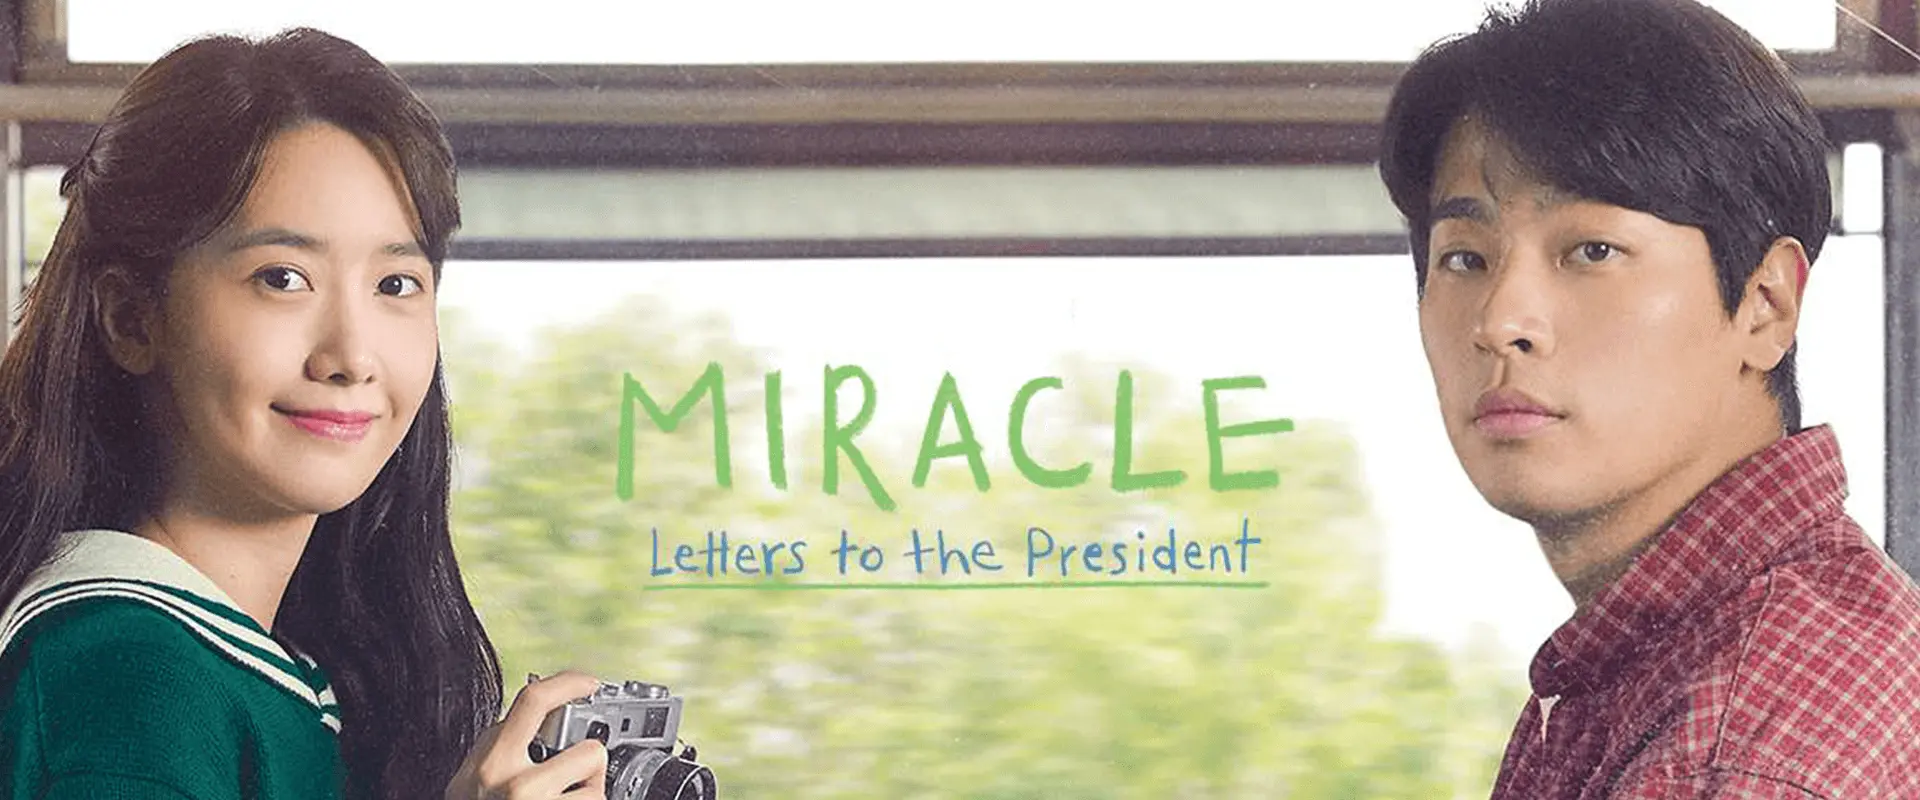 Miracle-Letters-to-the-President (2021) - Movie777